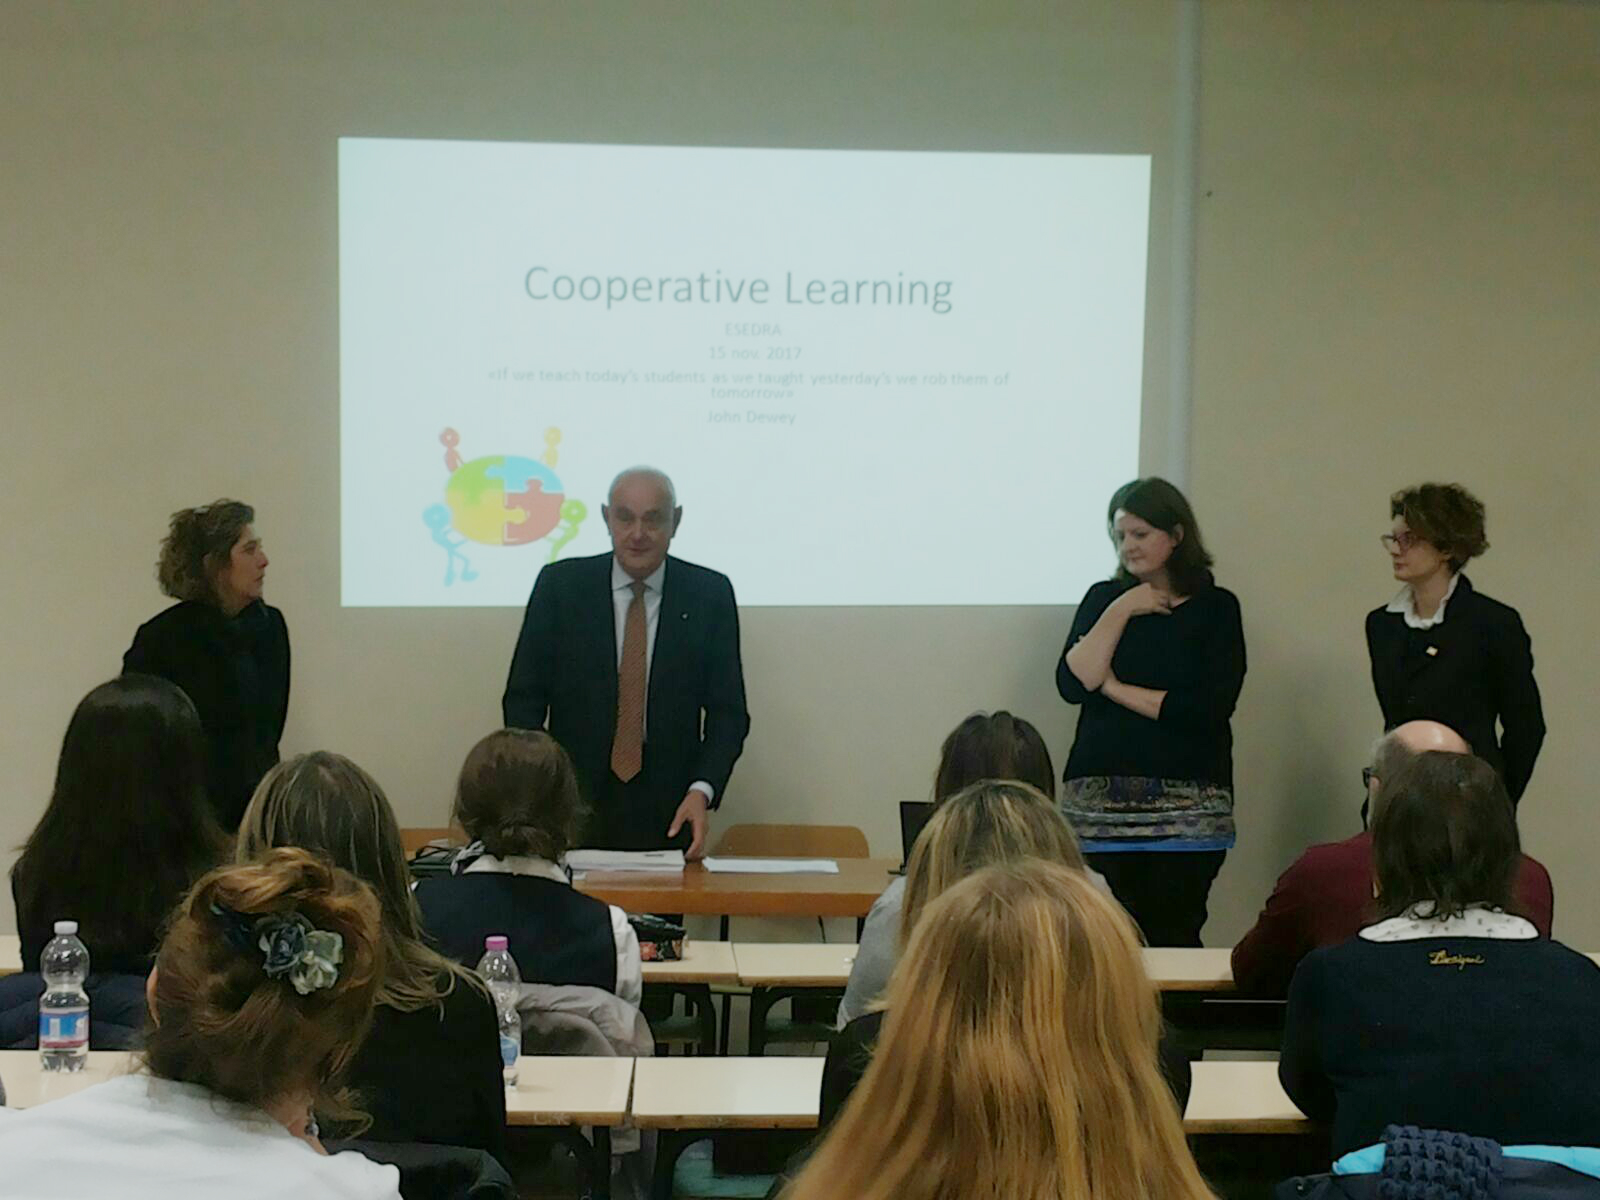 Conferenza Cooperative Learning